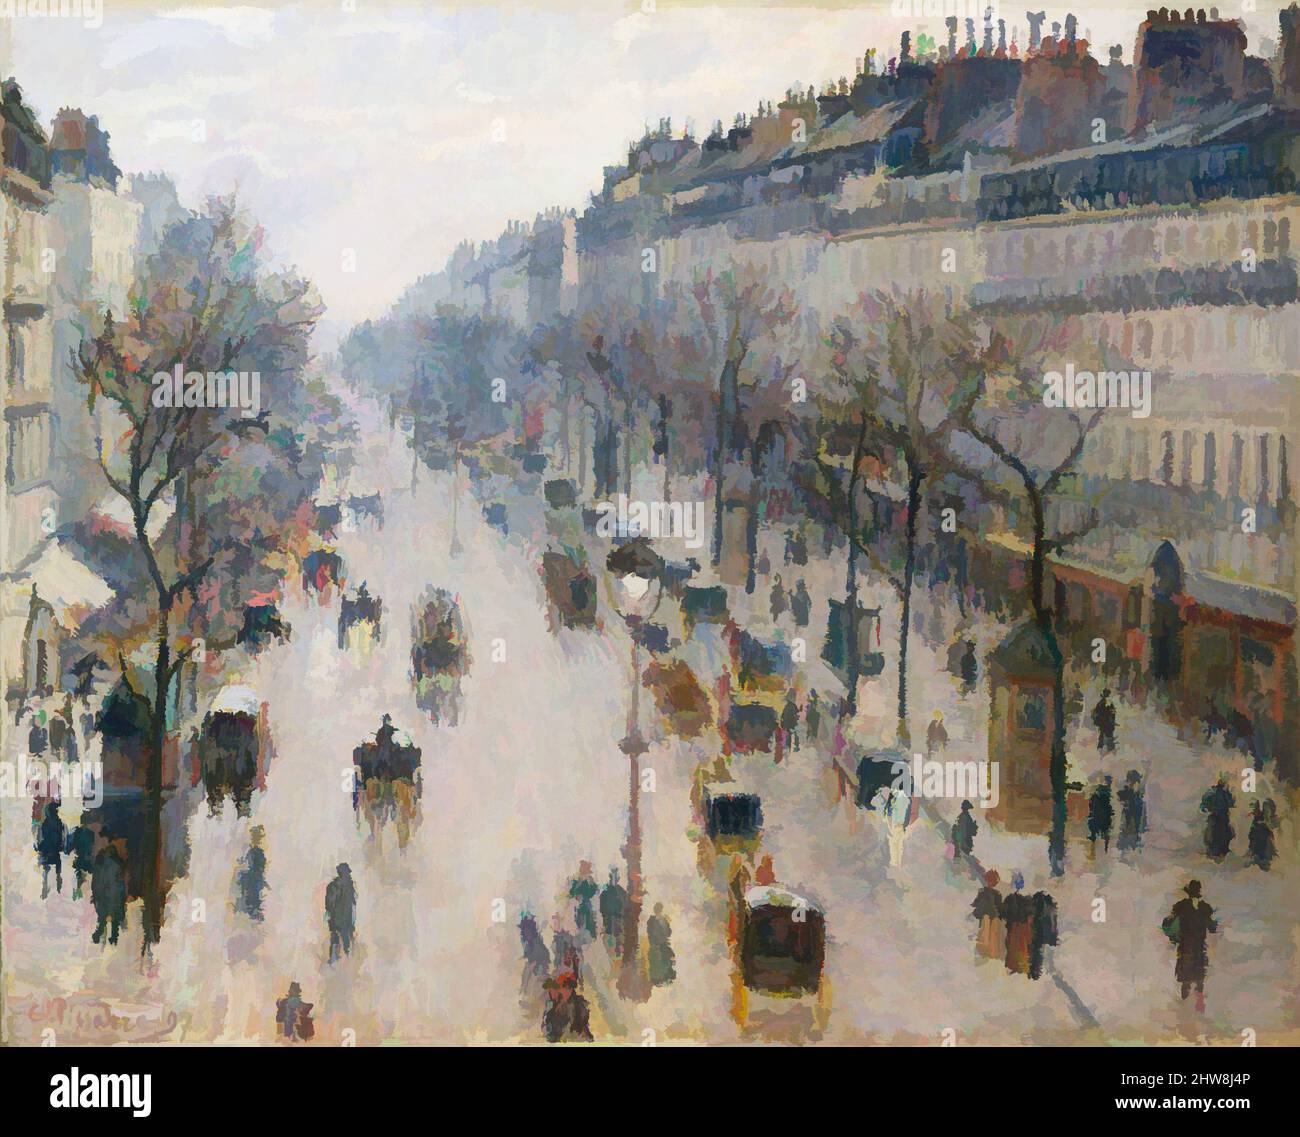 Art inspired by The Boulevard Montmartre on a Winter Morning, 1897, Oil on canvas, 25 1/2 x 32 in. (64.8 x 81.3 cm), Paintings, Camille Pissarro (French, Charlotte Amalie, Saint Thomas 1830–1903 Paris), After spending six years in rural Éragny, Pissarro returned to Paris, where he, Classic works modernized by Artotop with a splash of modernity. Shapes, color and value, eye-catching visual impact on art. Emotions through freedom of artworks in a contemporary way. A timeless message pursuing a wildly creative new direction. Artists turning to the digital medium and creating the Artotop NFT Stock Photo